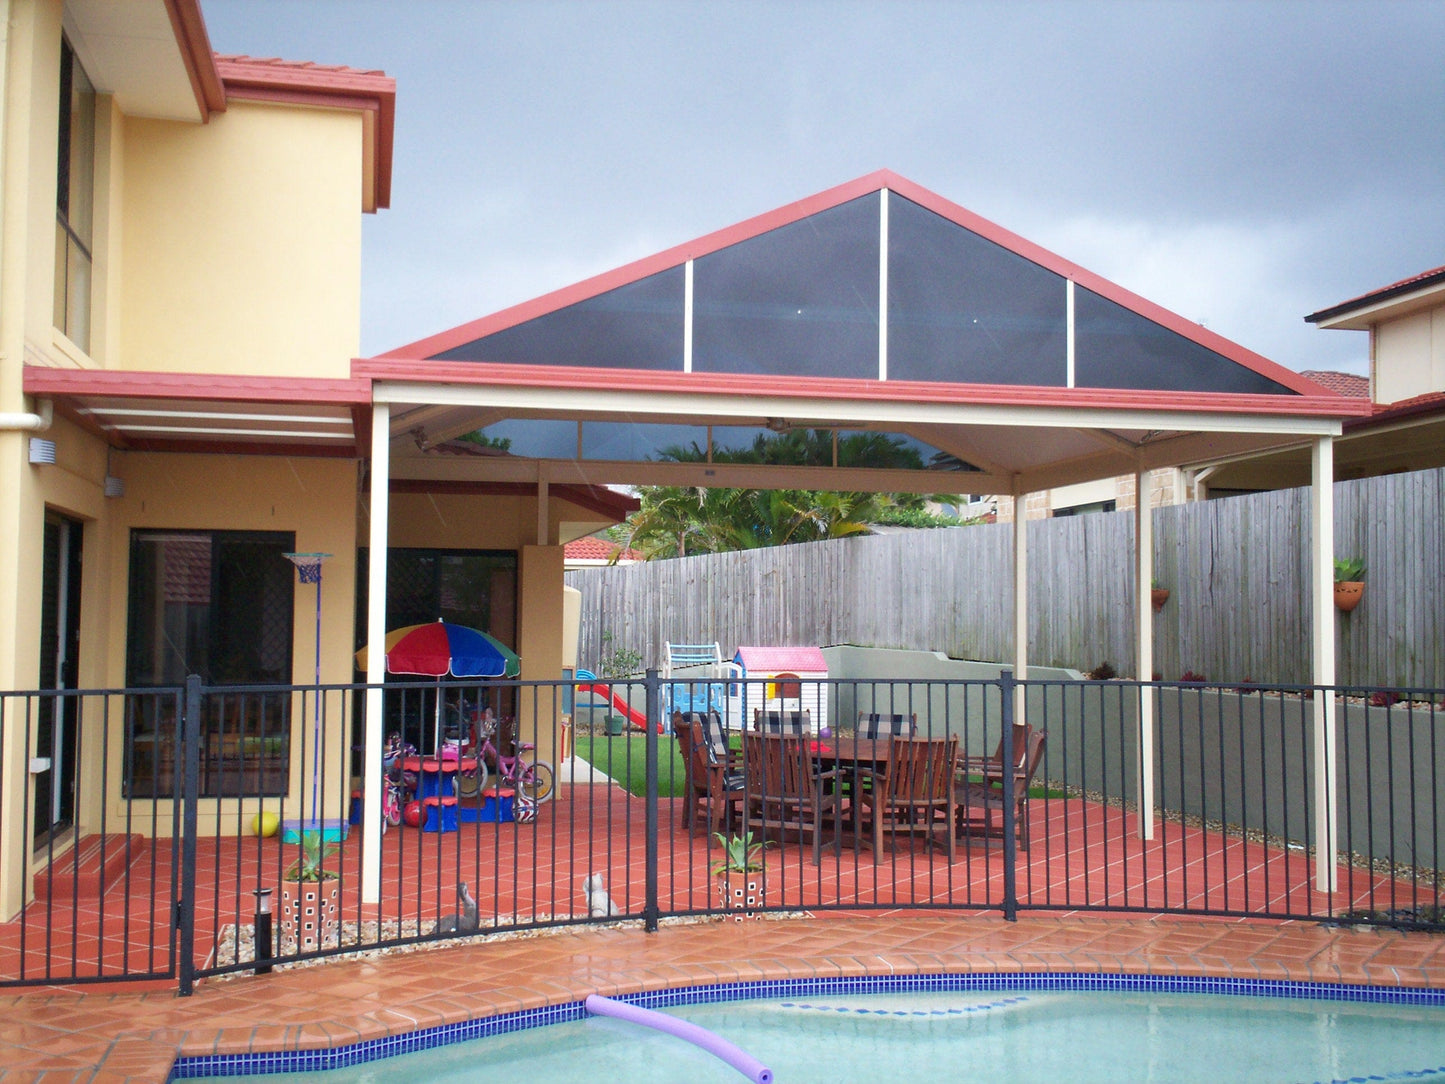 Insulated Gable Patio - 10m x 6m- Supply & Install QHI National